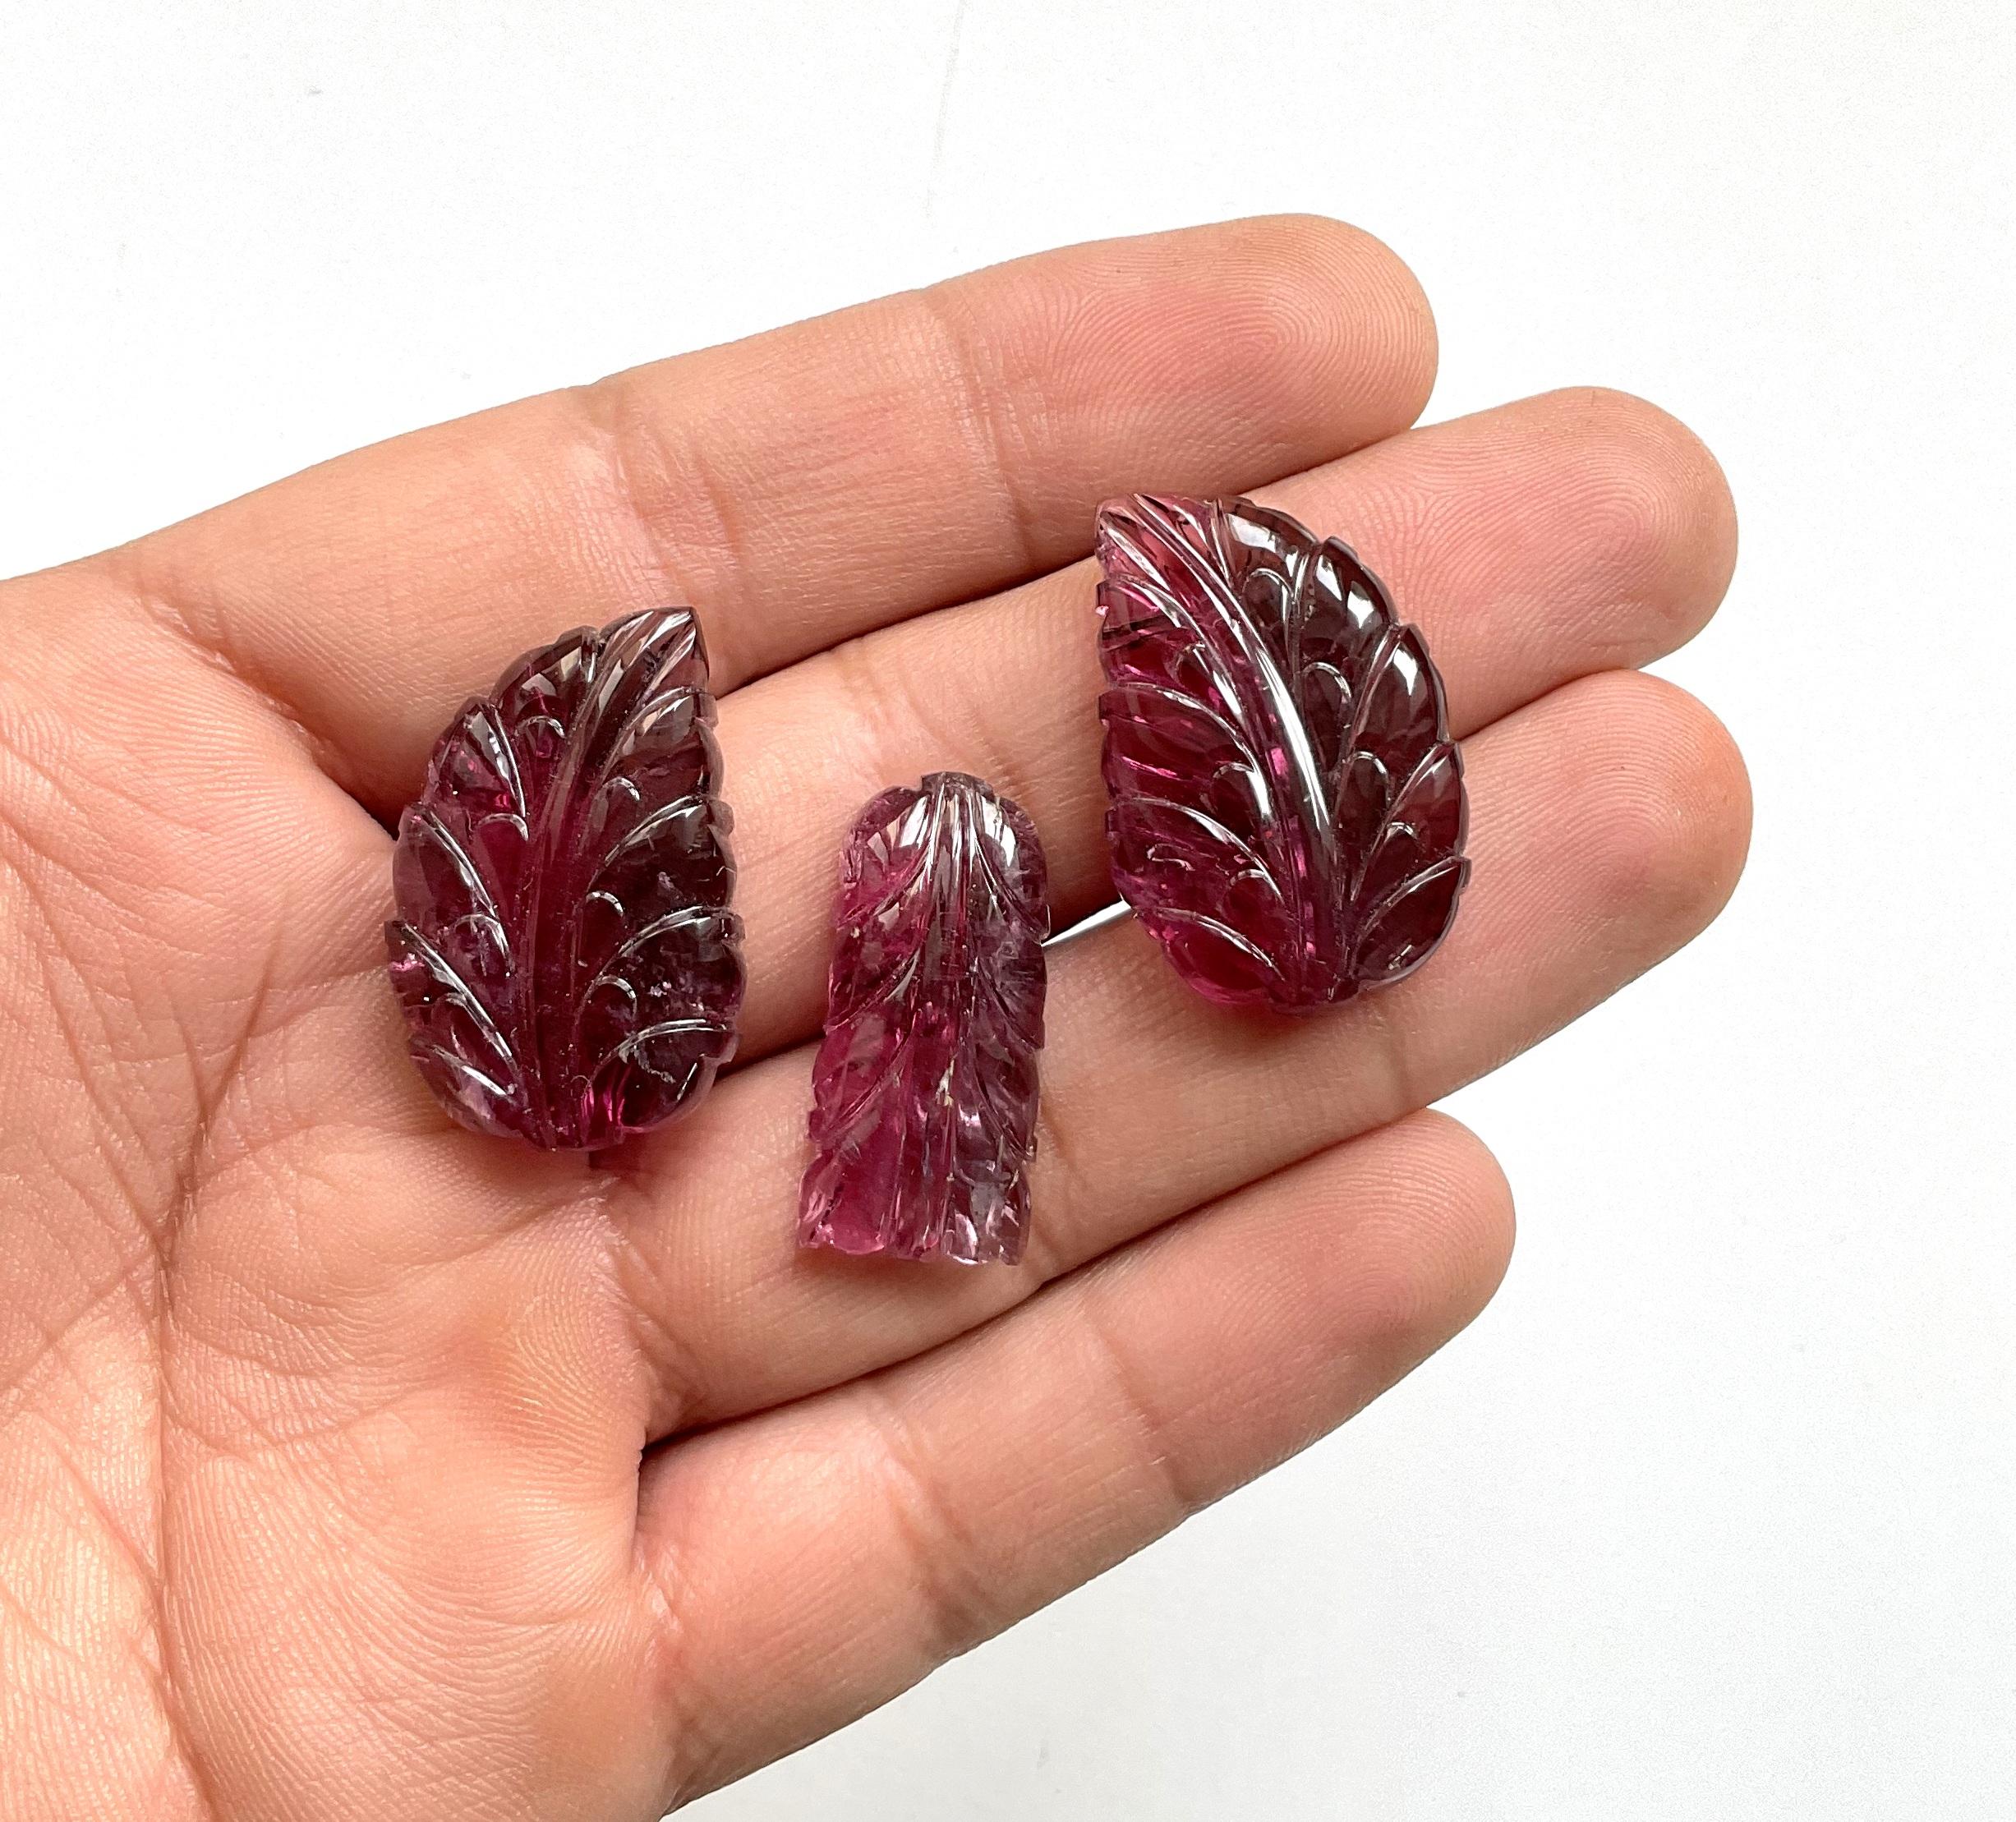 84.37 Carats Rubellite Tourmaline Carved Leaf 3 Pieces Fine jewelry Natural Gem For Sale 2